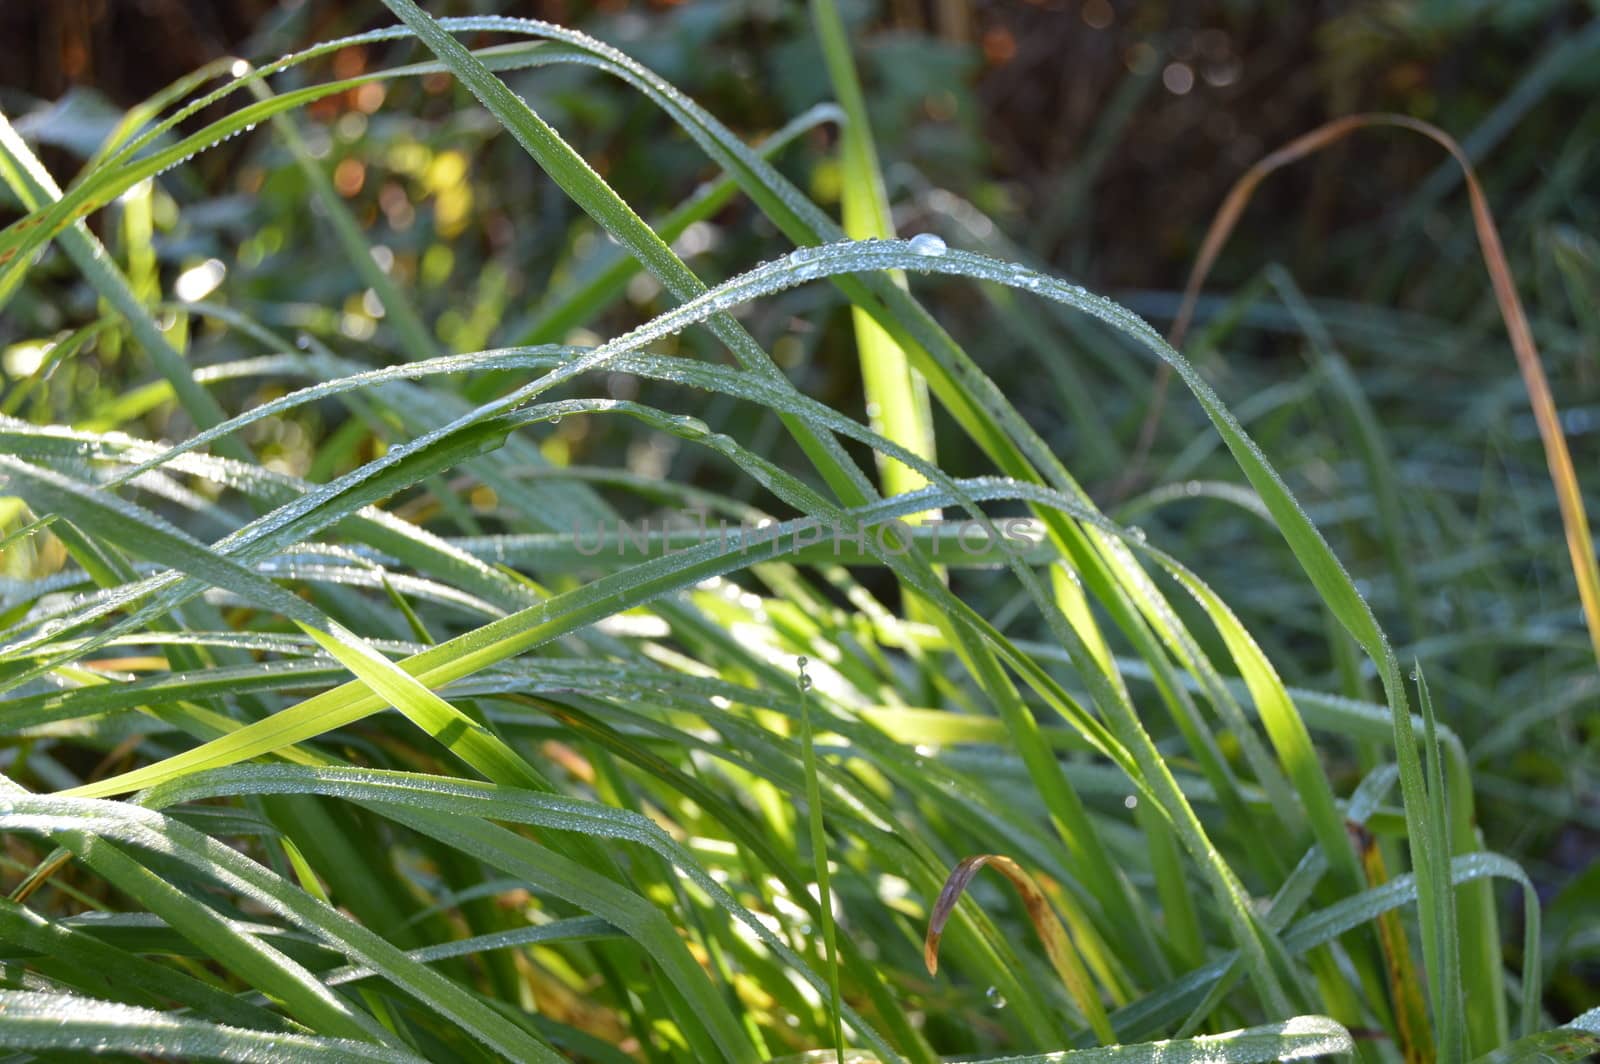 Straw with morning dew in the sun